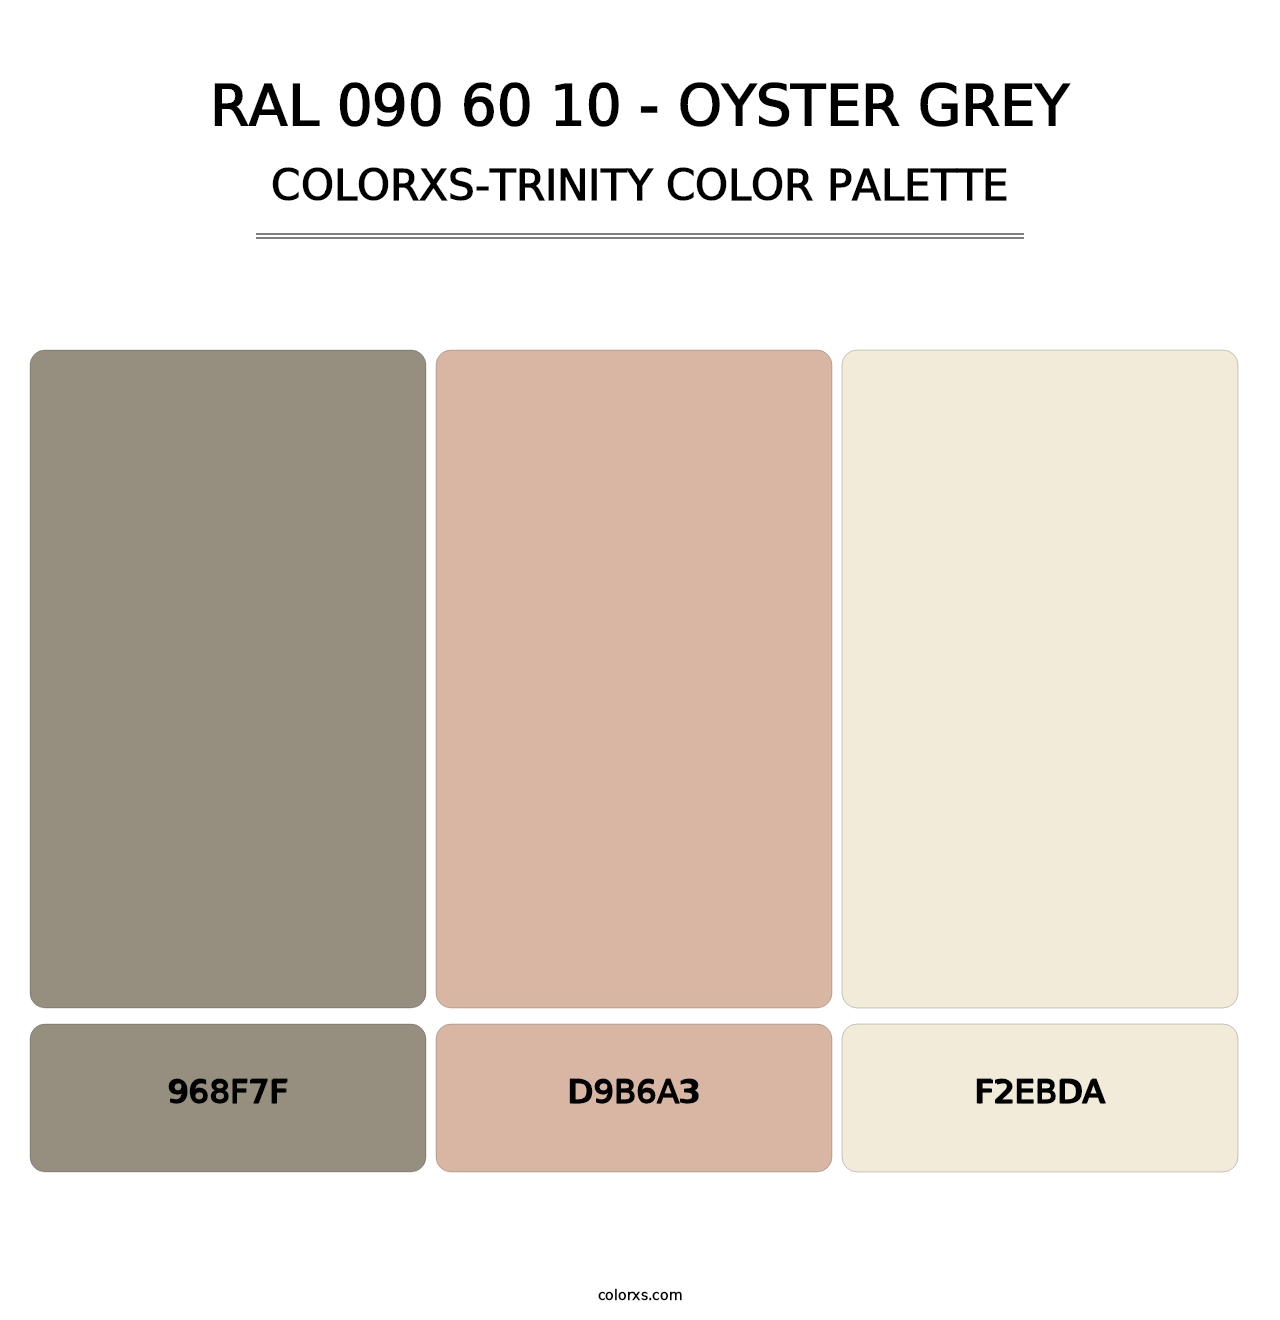 RAL 090 60 10 - Oyster Grey - Colorxs Trinity Palette